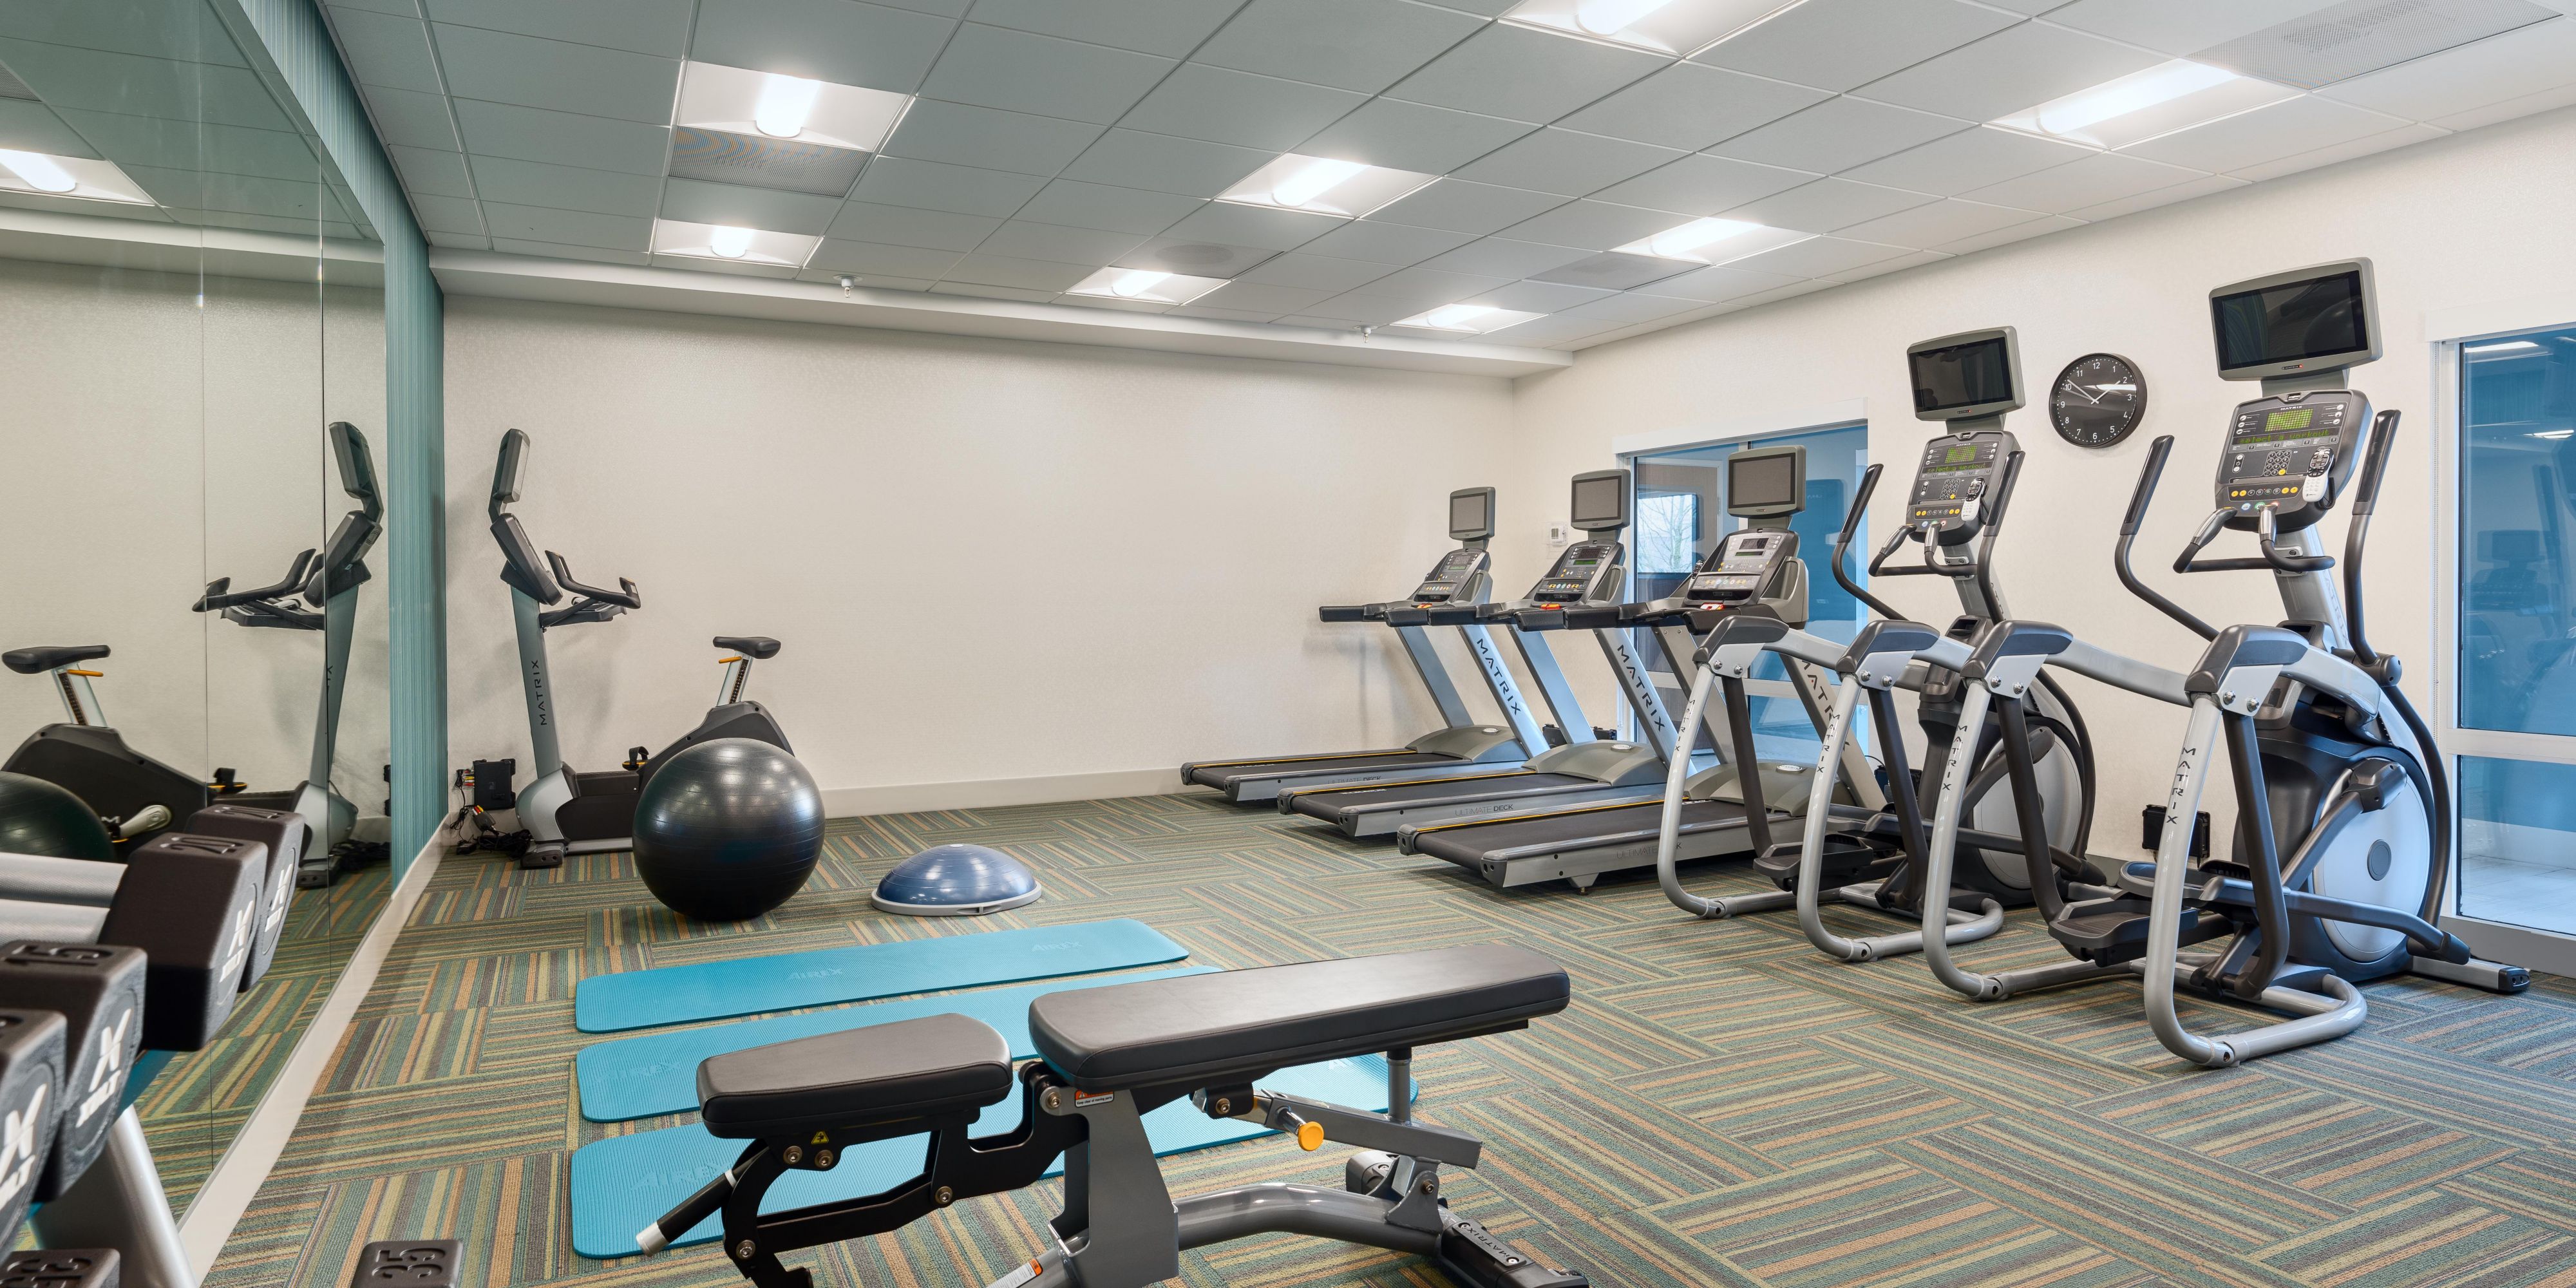 Let us help you stick to your fitness goals with our 24 hour fitness facility. Fully equipped with a variety of cardio and strength training equipment.